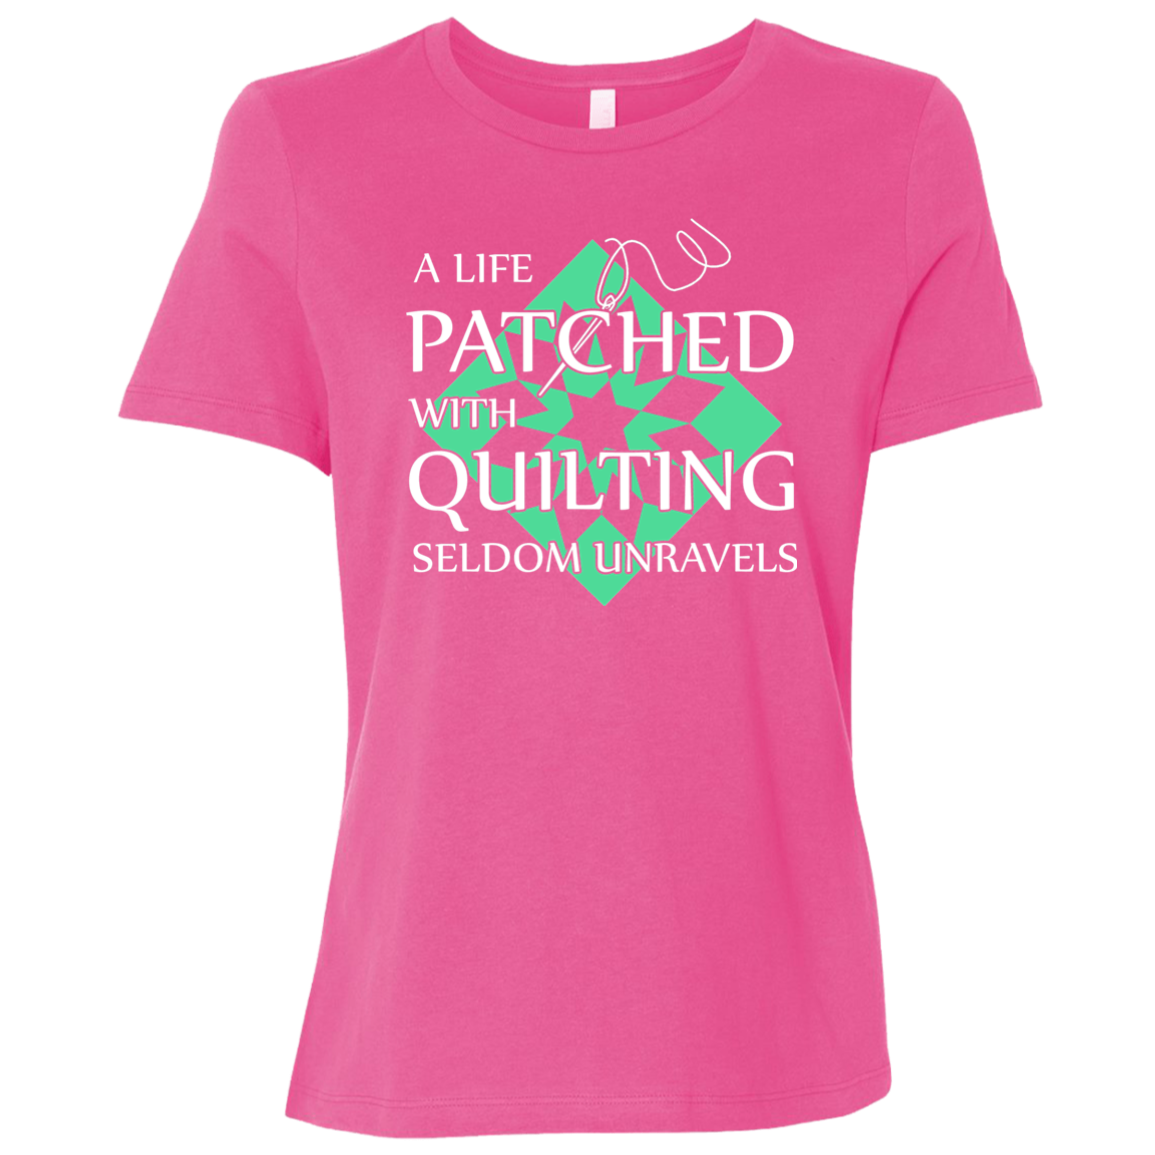 Quilting Seldom Unravels Ladies' Relaxed Jersey Short-Sleeve T-Shirt